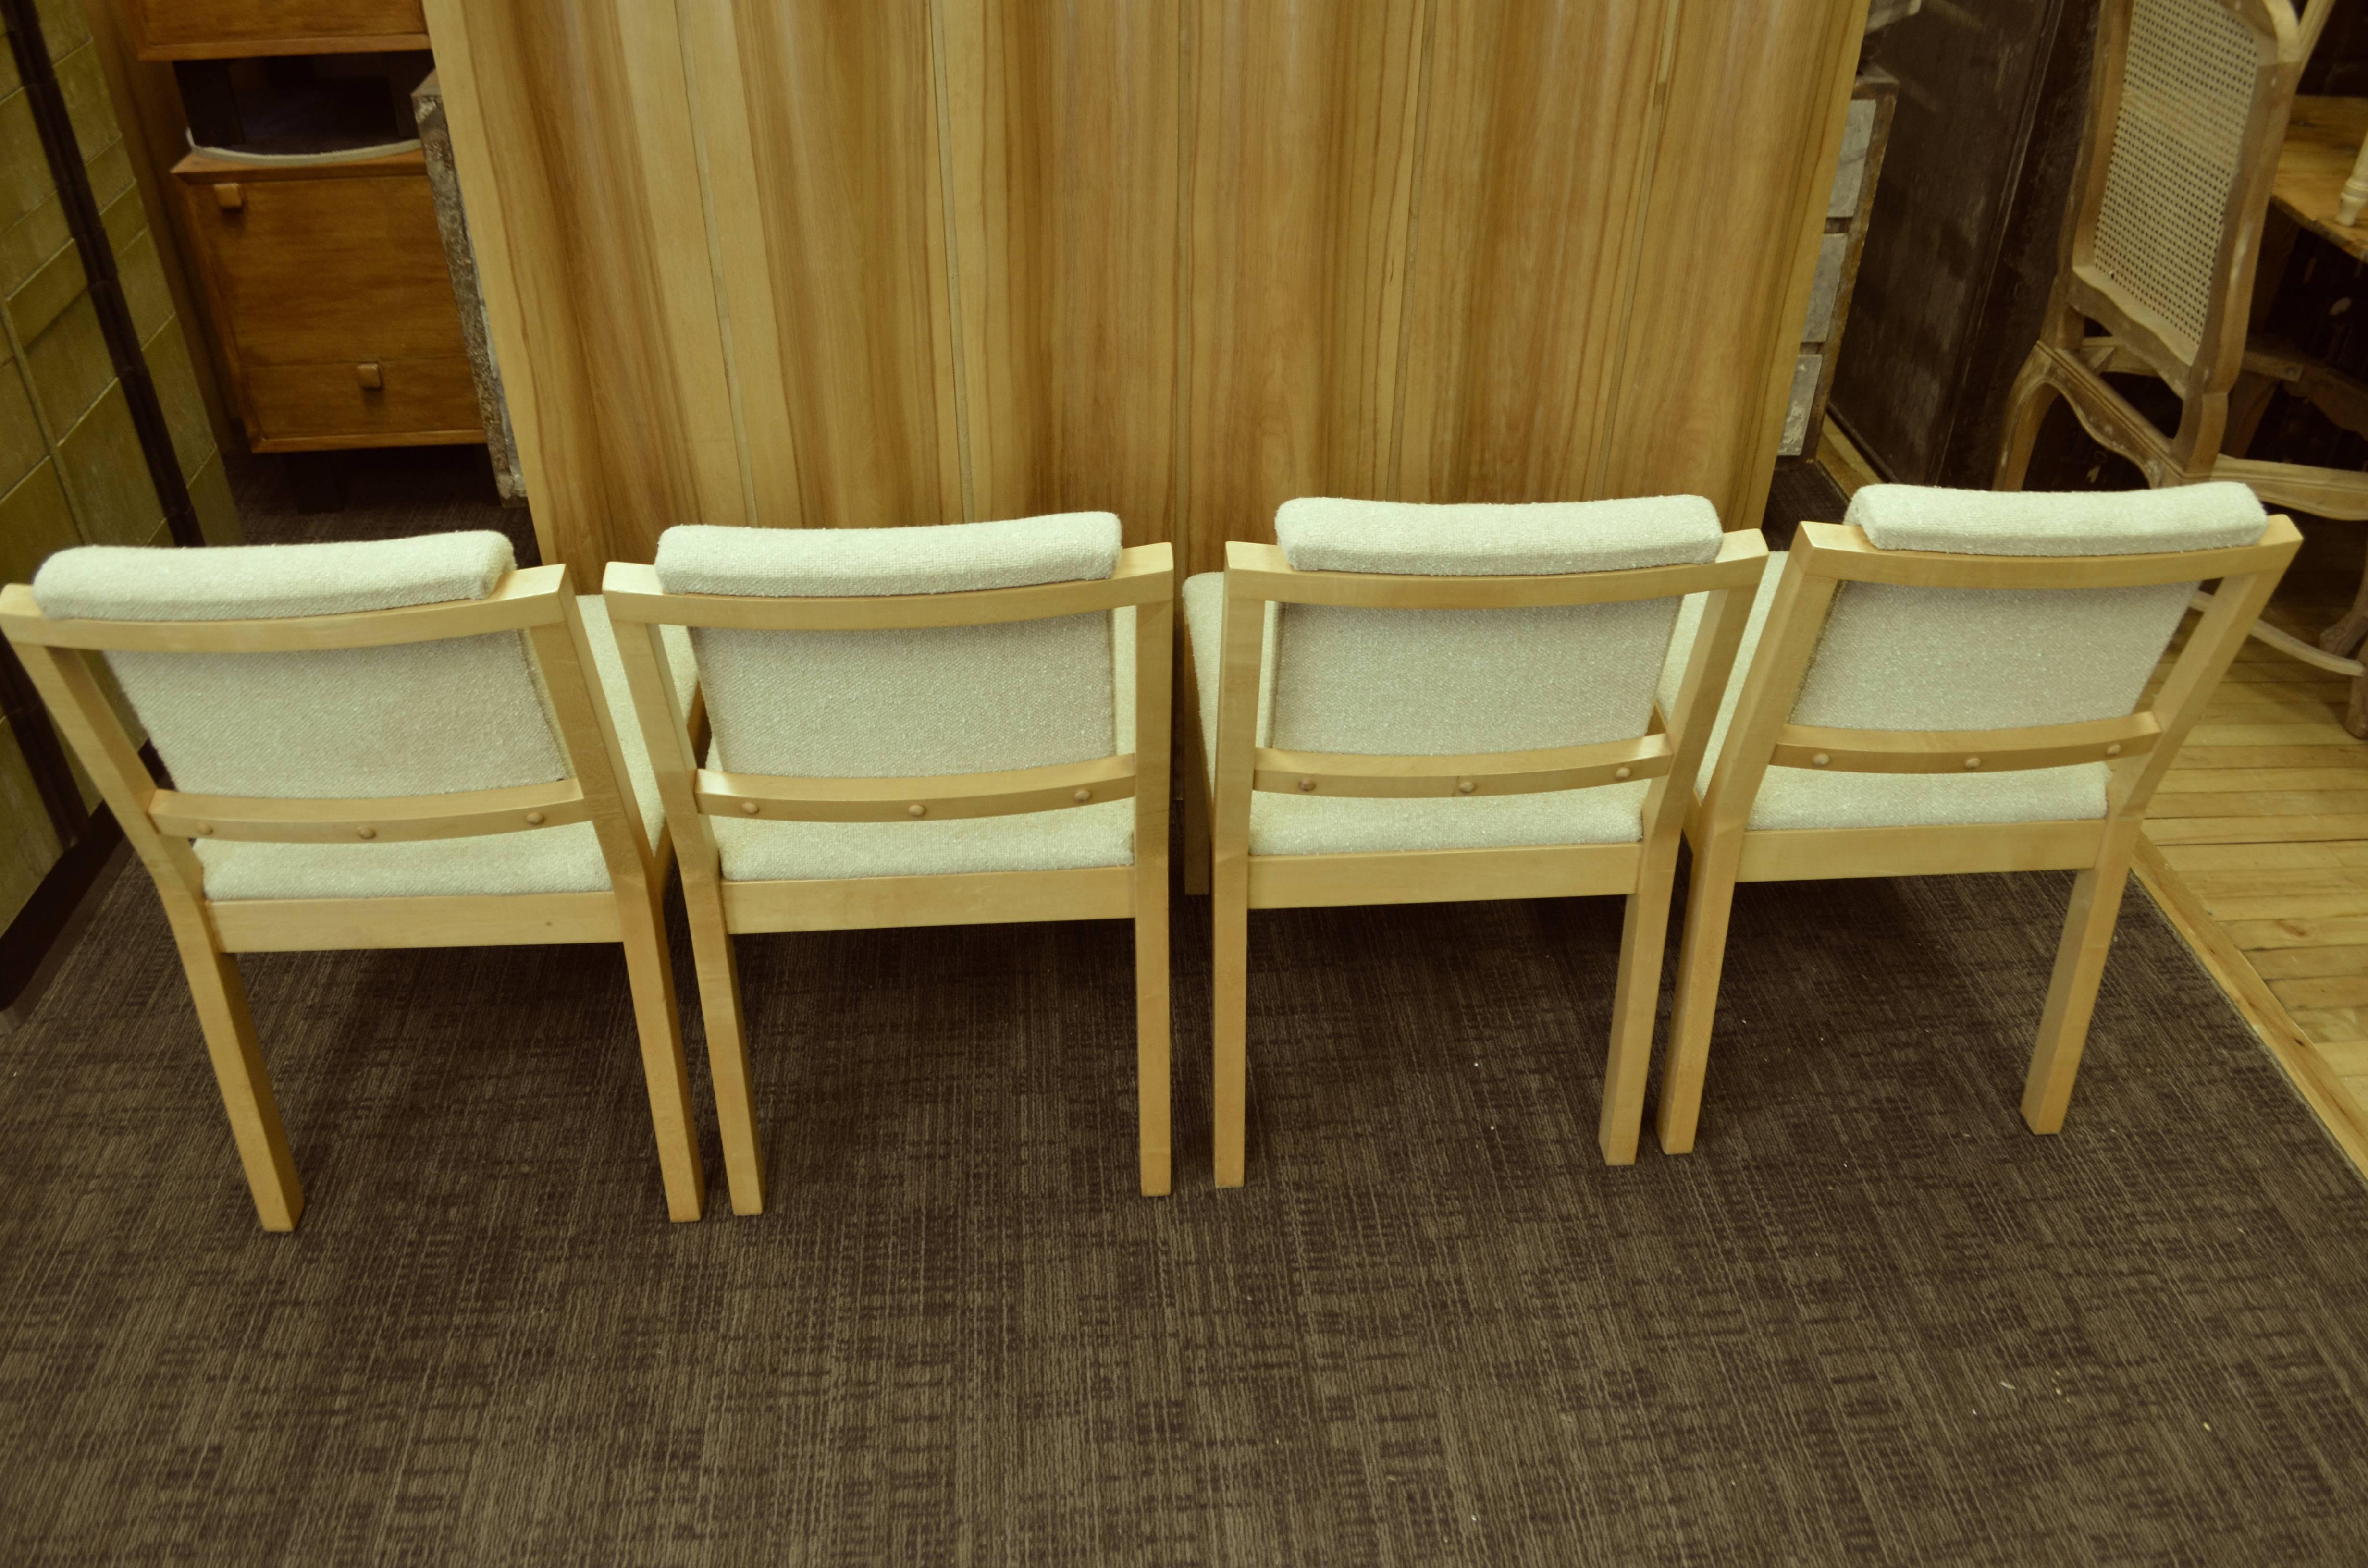 American Midcentury Dining Chairs with Maple Frames and Wool Upholstery, Set of Four For Sale